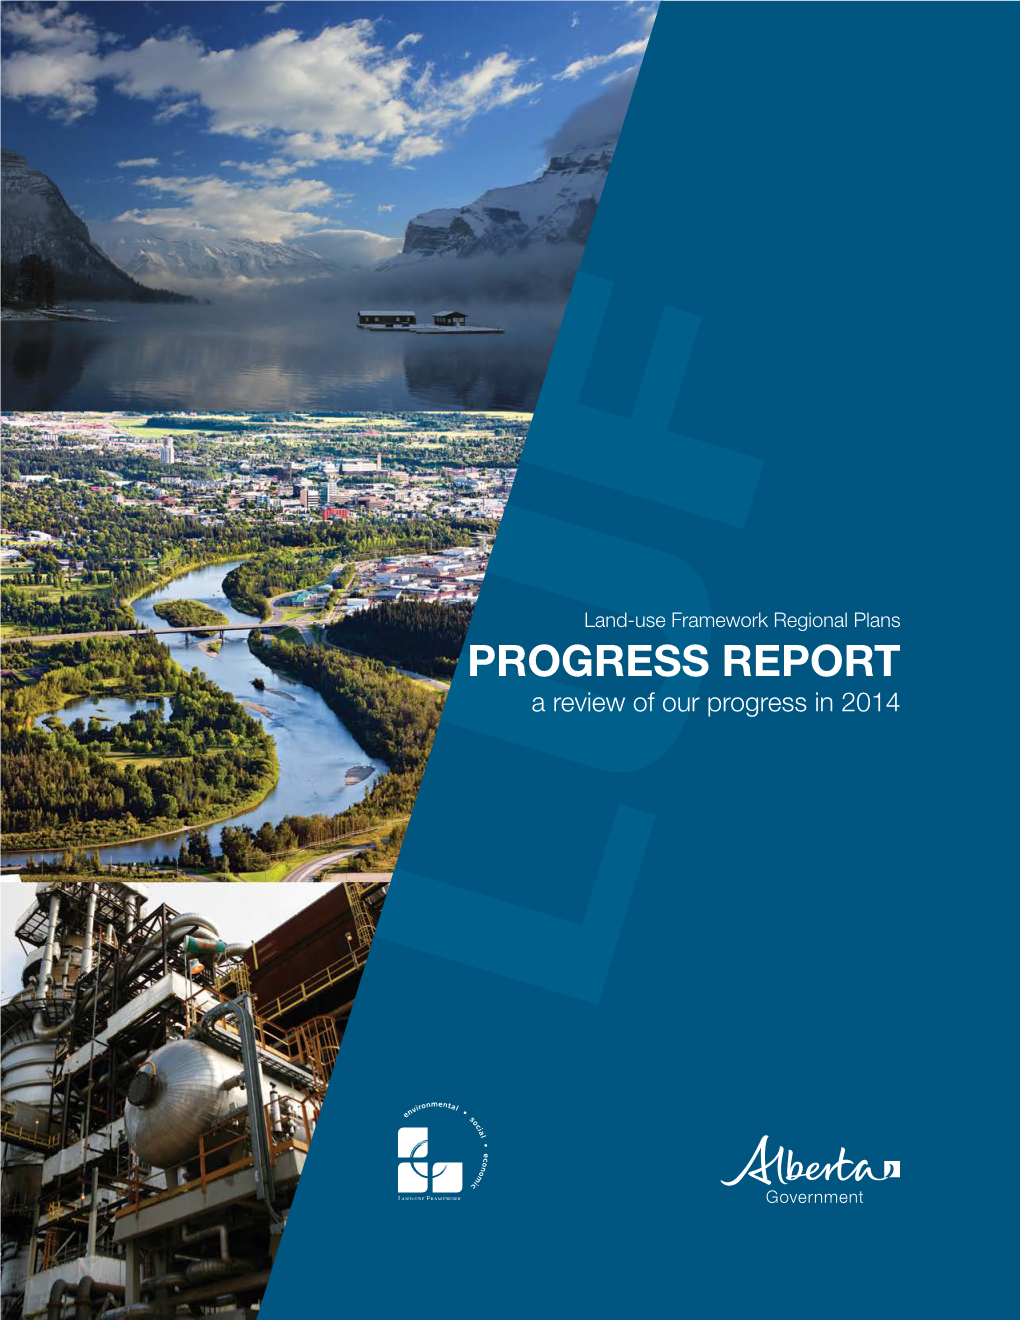 PROGRESS REPORT a Review of Our Progress in 2014